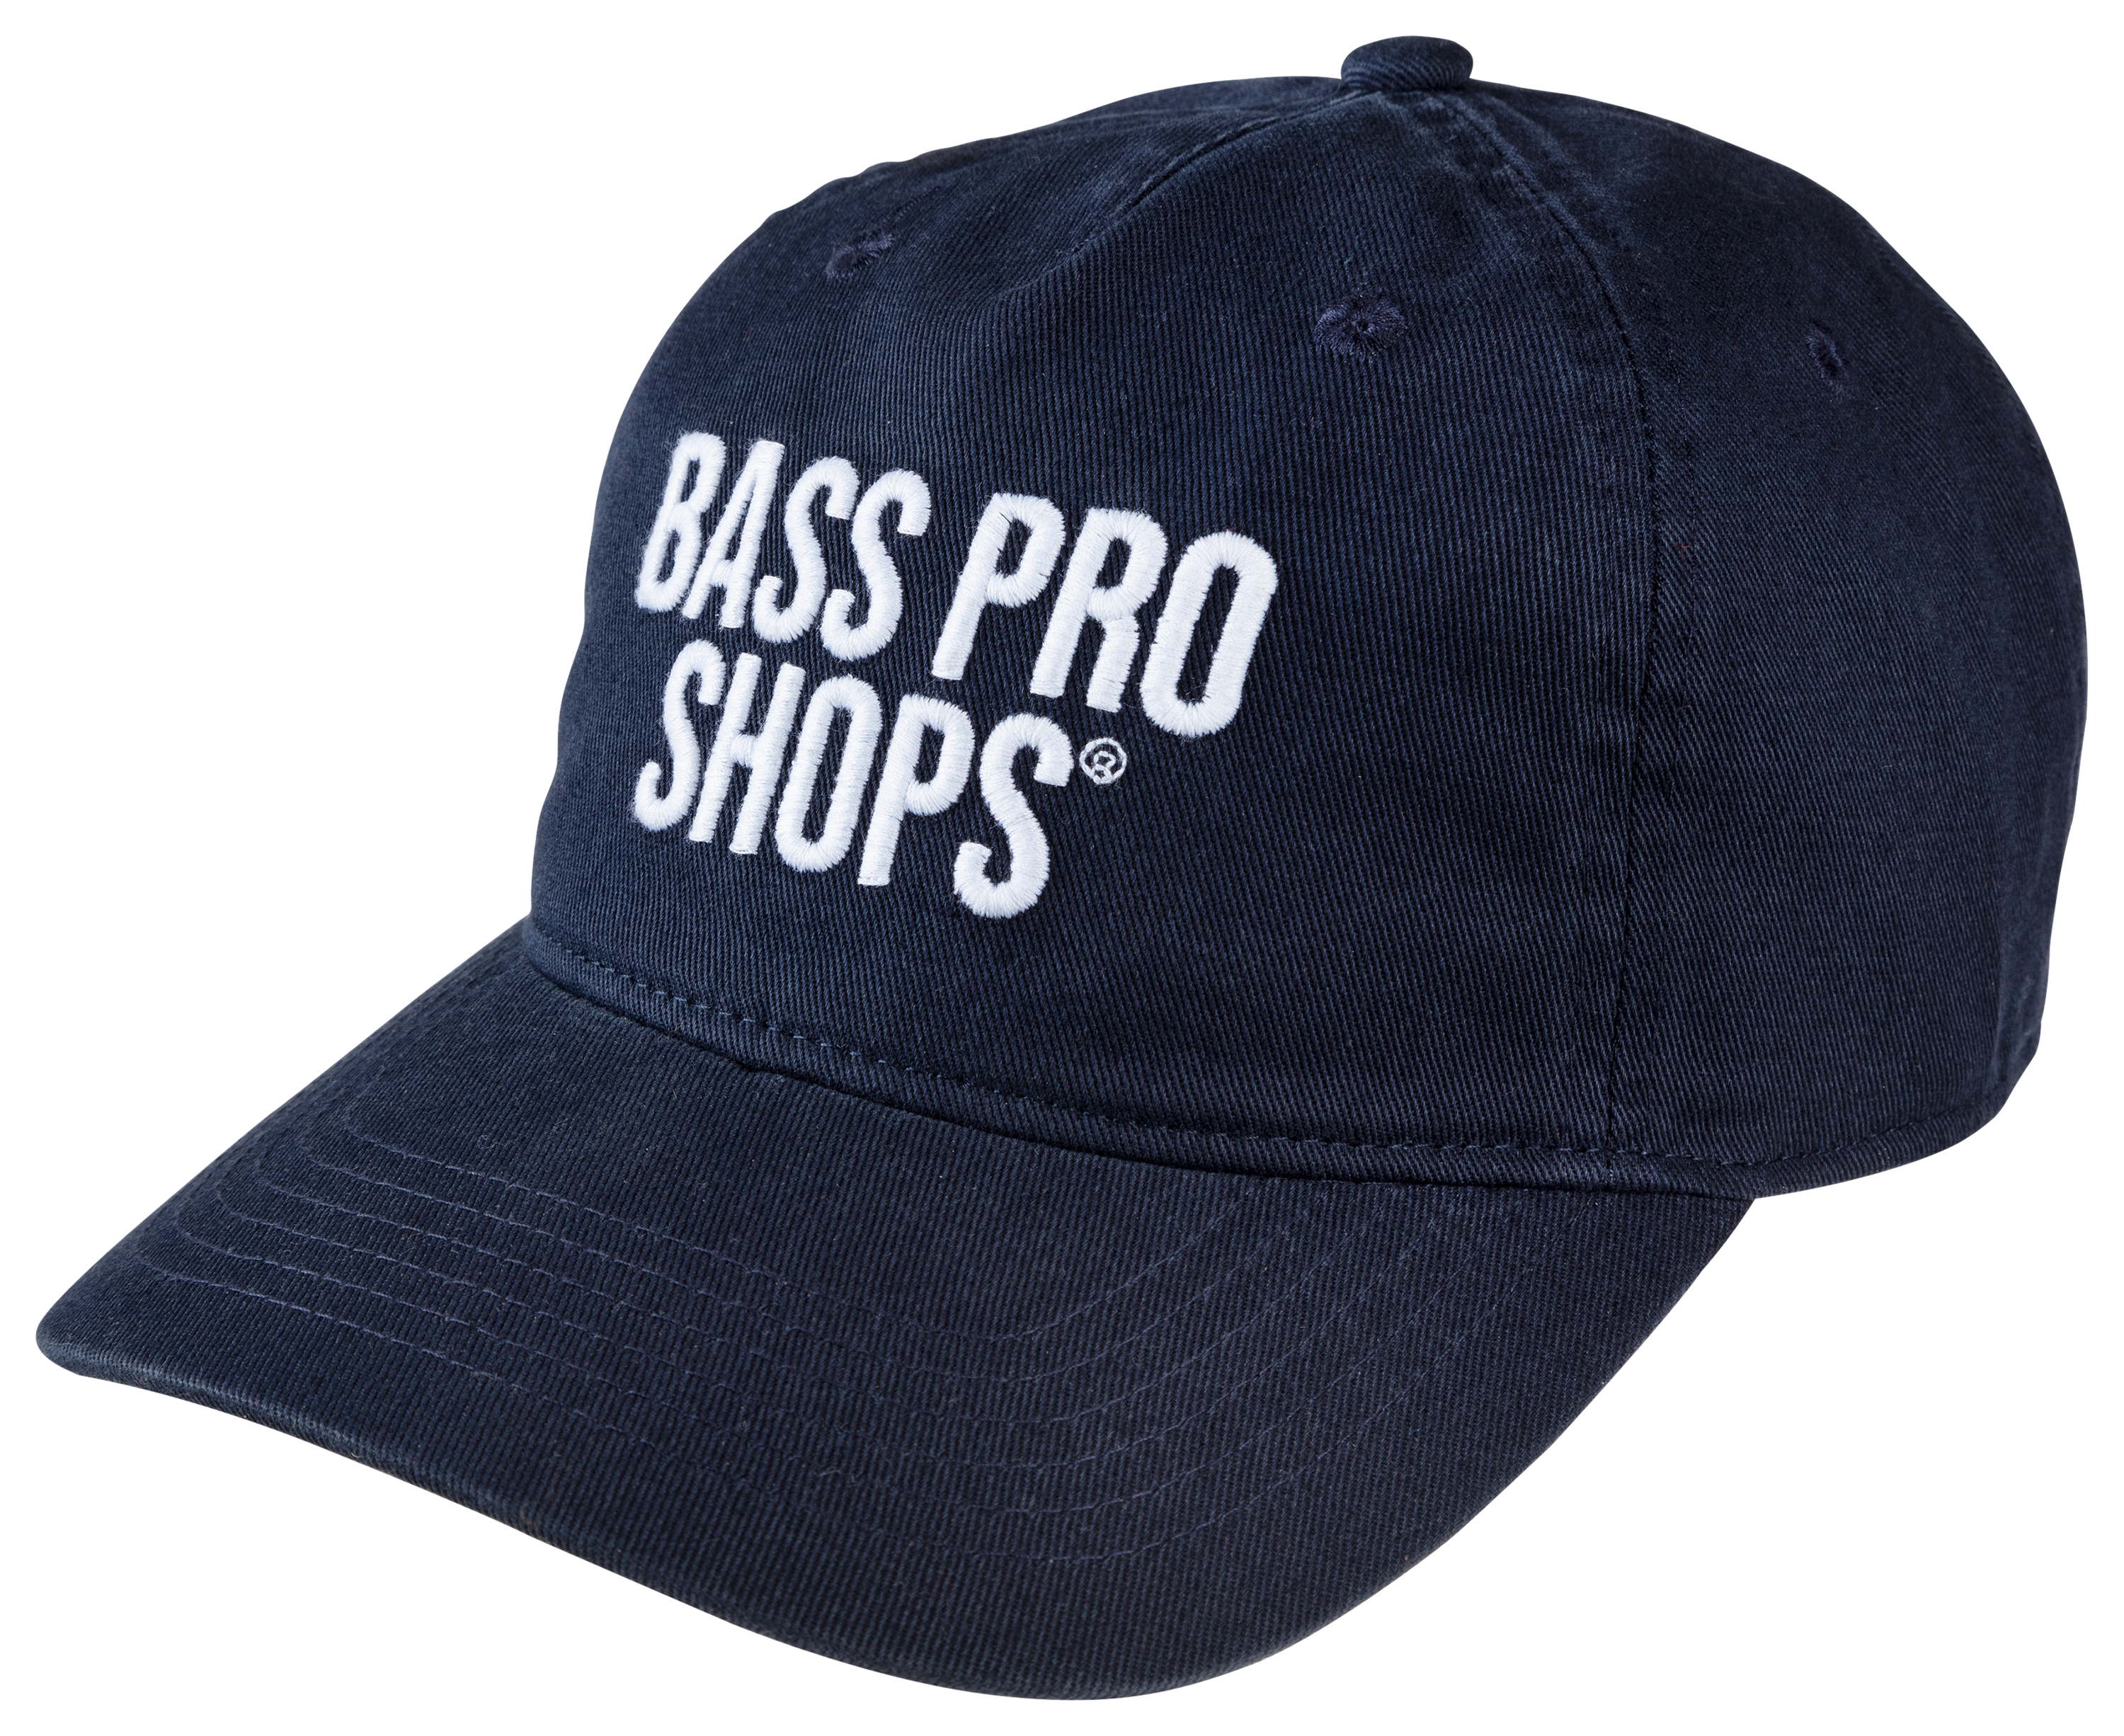 Bass Pro Shops Twill Cap for Toddlers or Kids